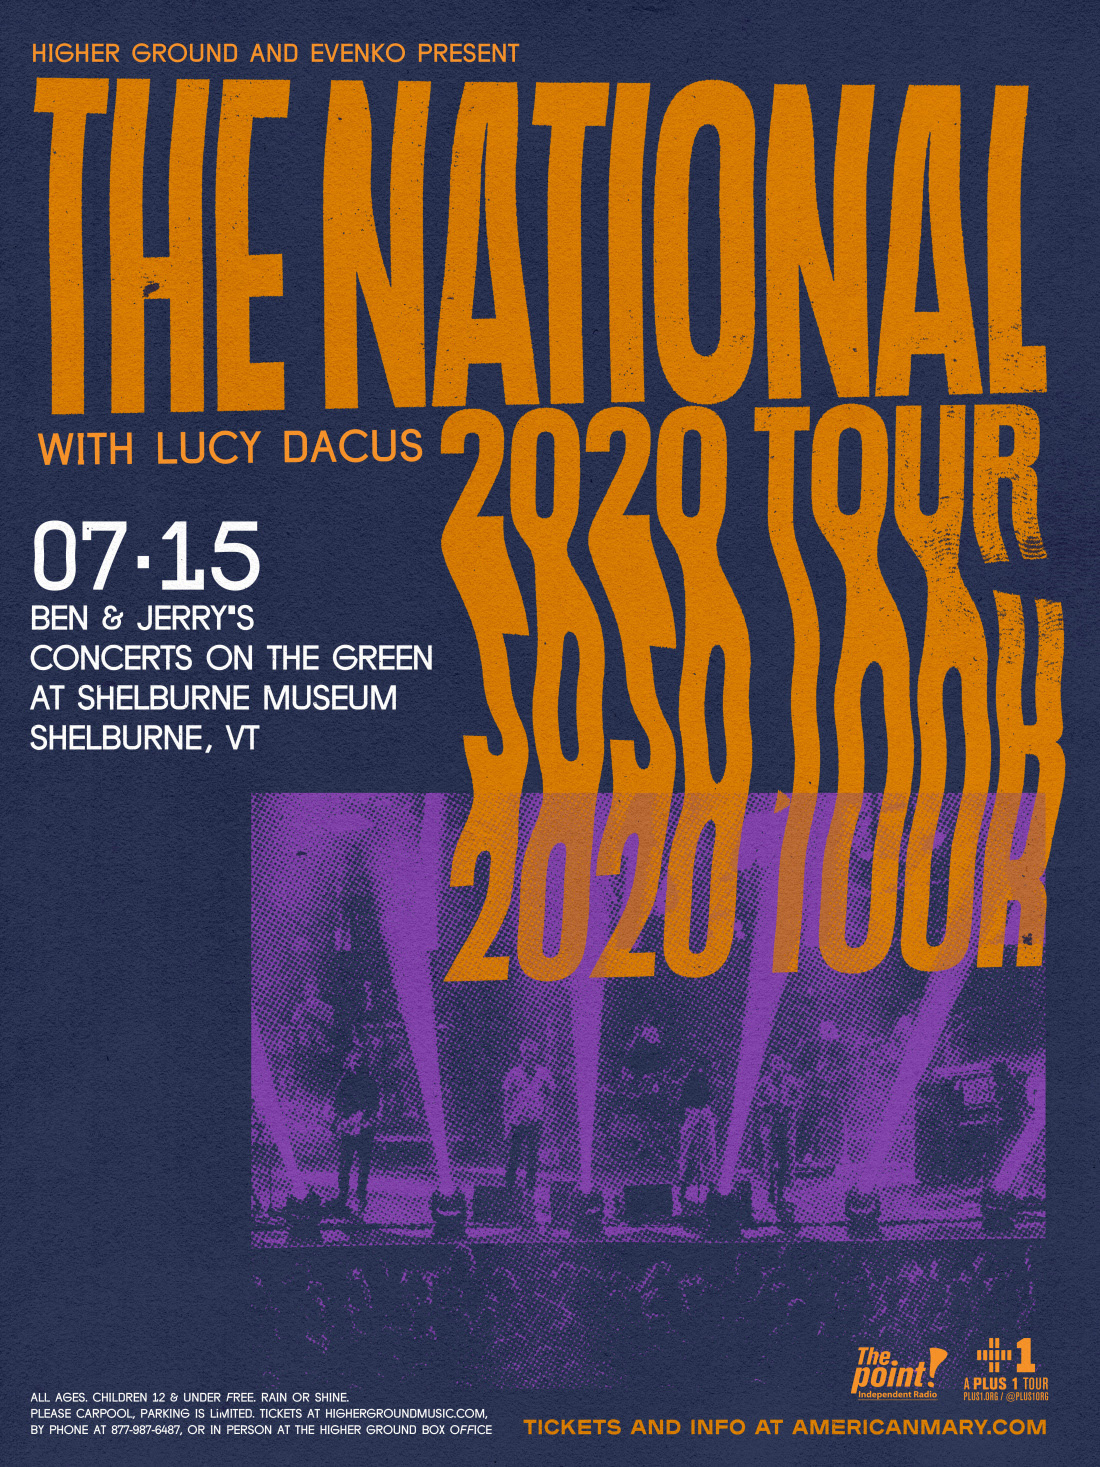  The National on July 15th at Shelburne Museum